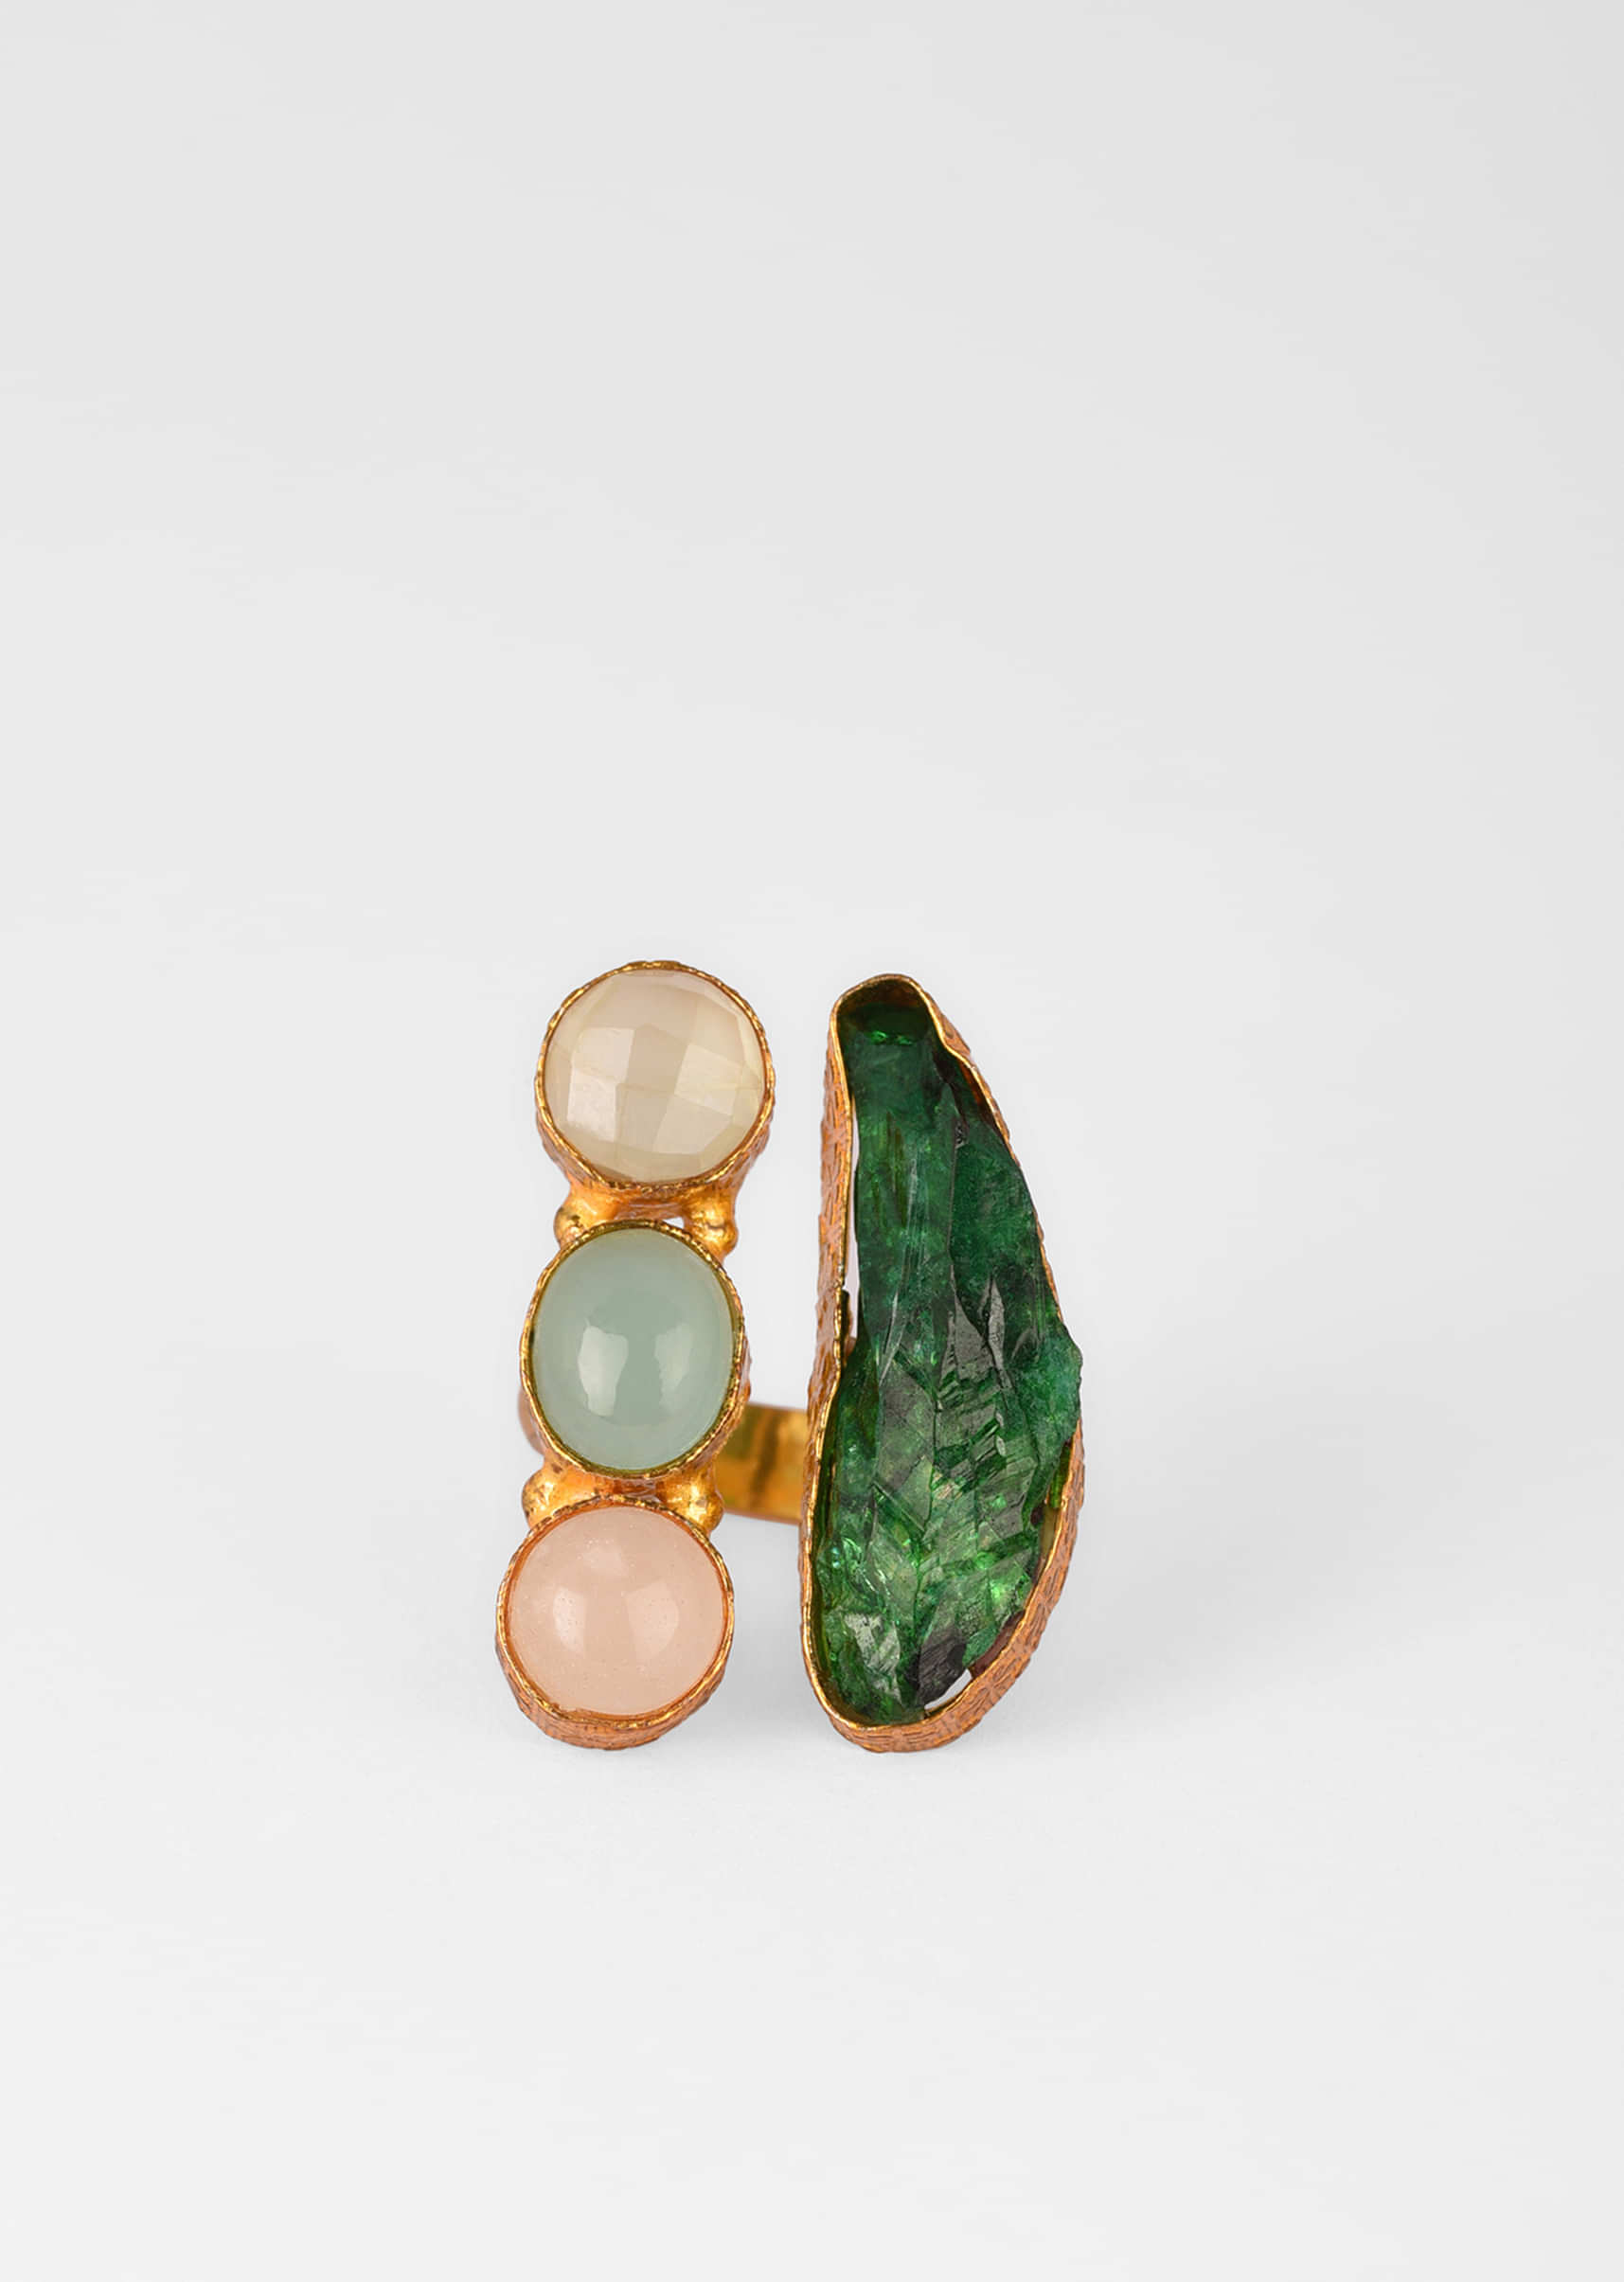 Multi Colored Ring With Abstract Green Semi Precious Stone And Tiny Stones In Pastel Hues 